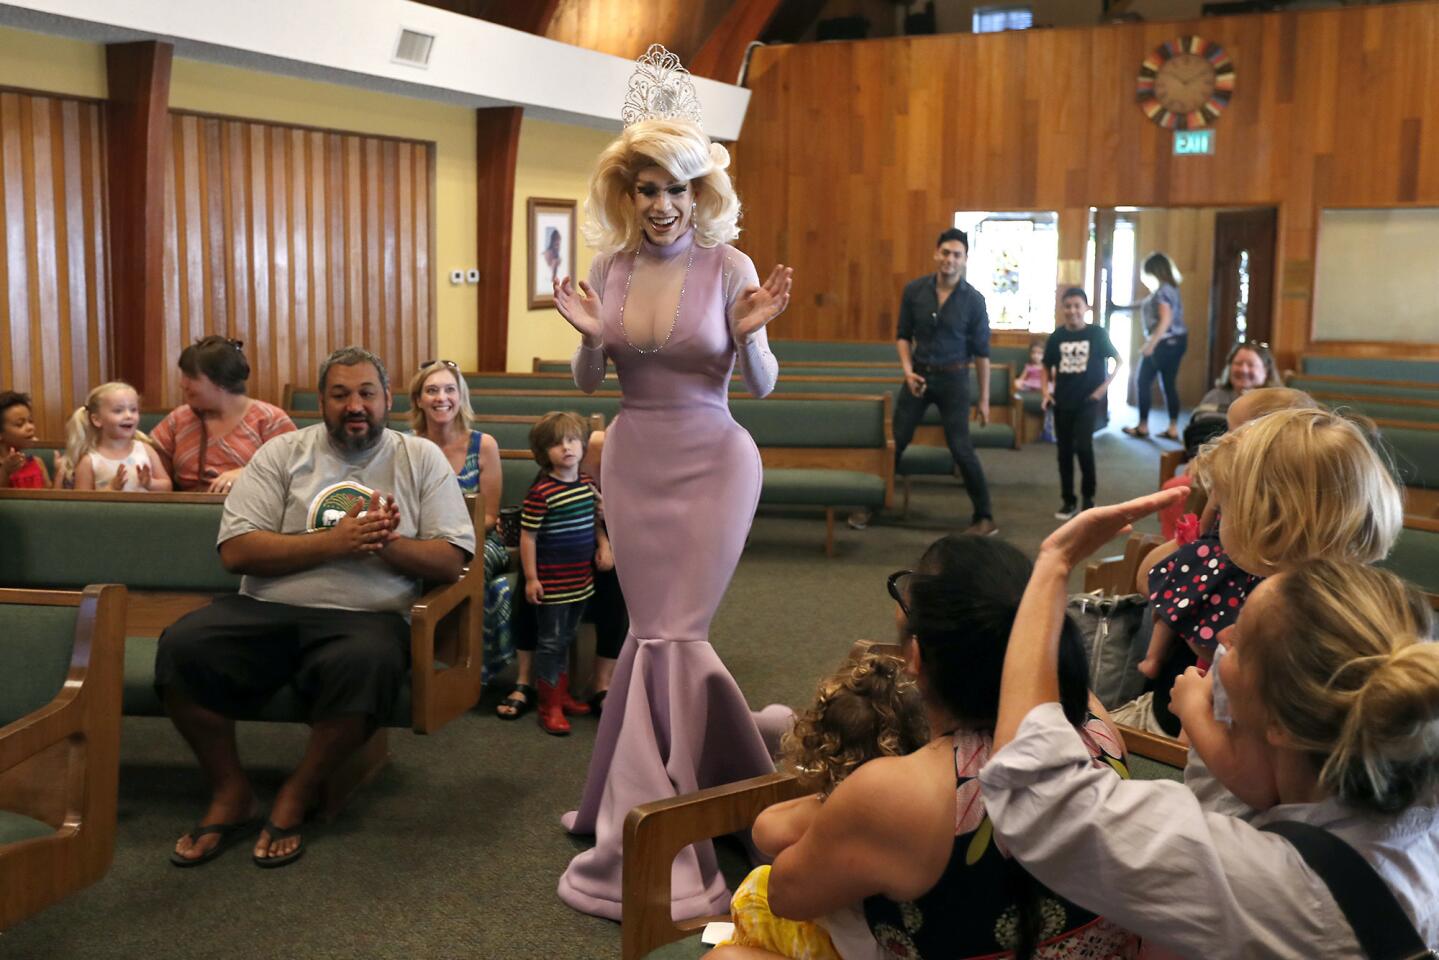 Photo Gallery: Drag queen Autumn Rose reads to children at Fairview Community Church